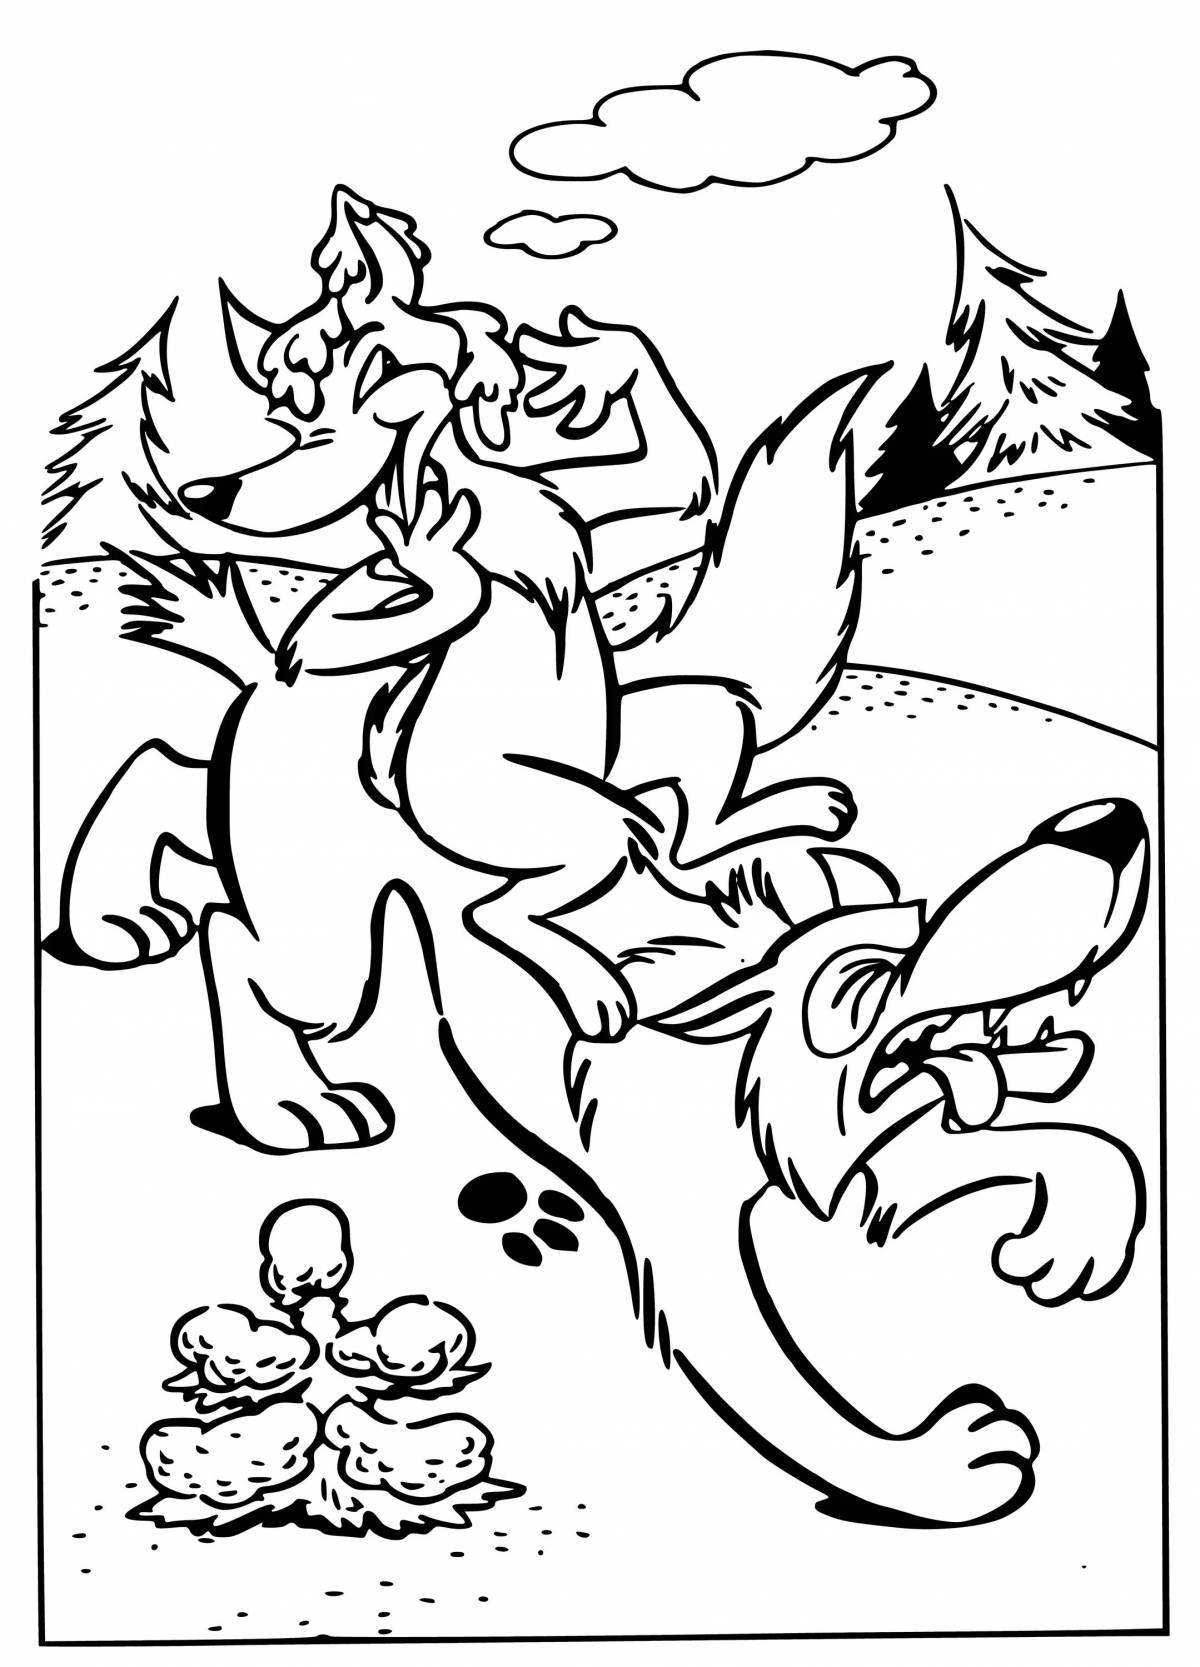 Fine sister fox and gray wolf coloring book